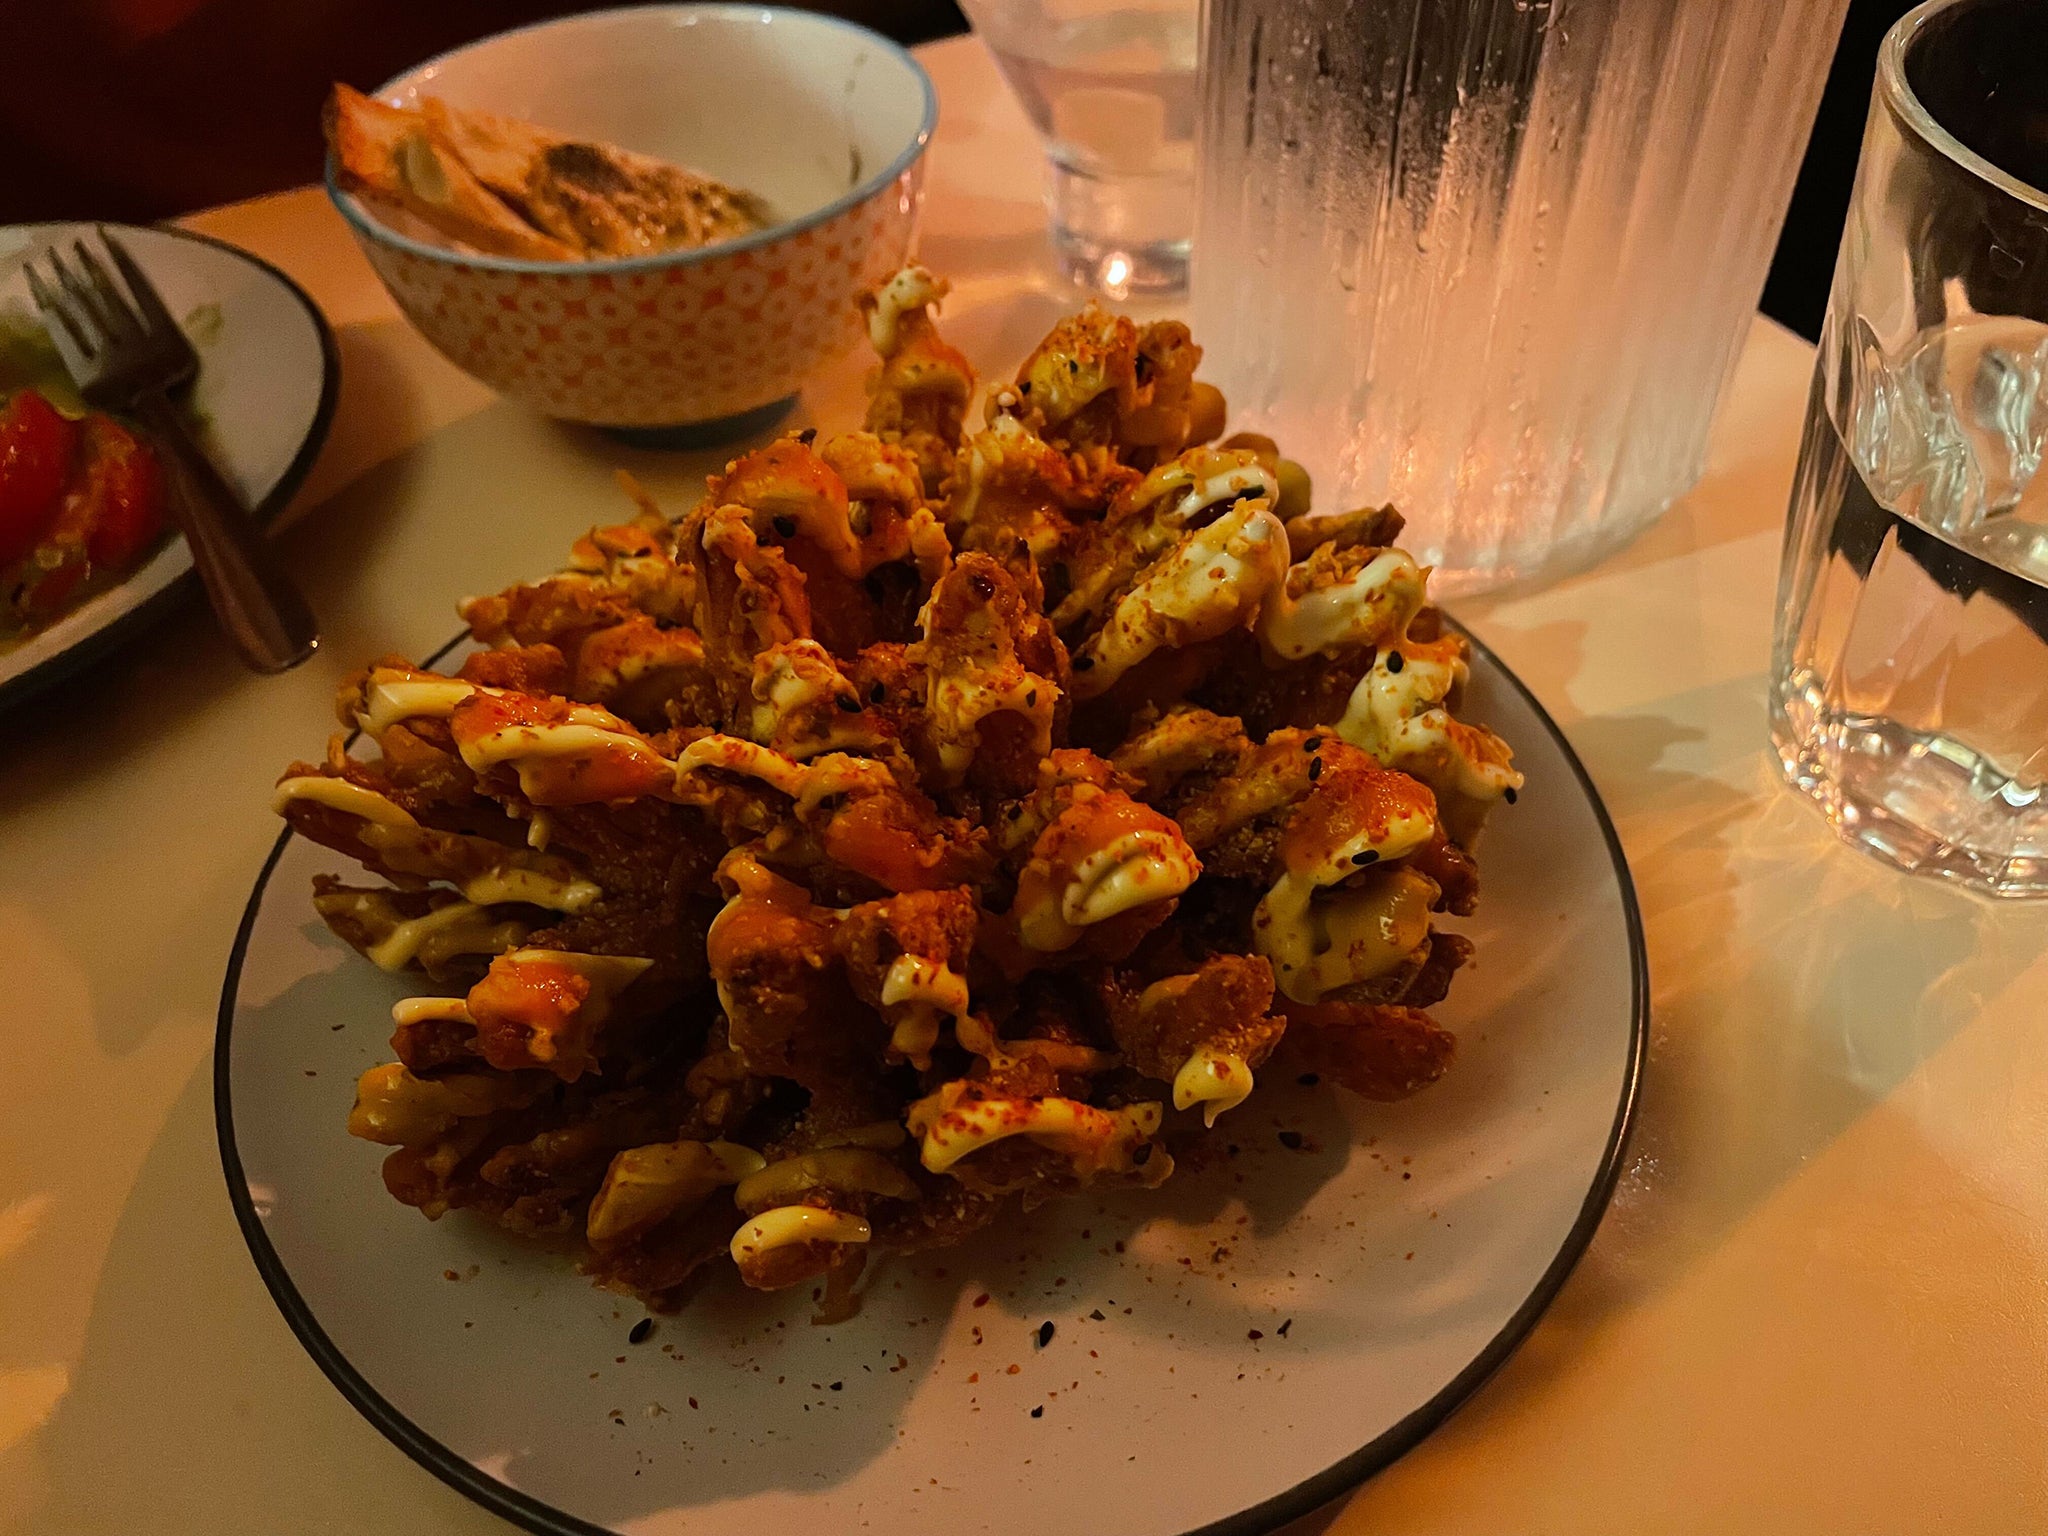 Bloomin’ beautiful: The blooming onion with lashings of Kewpie mayo is something to behold